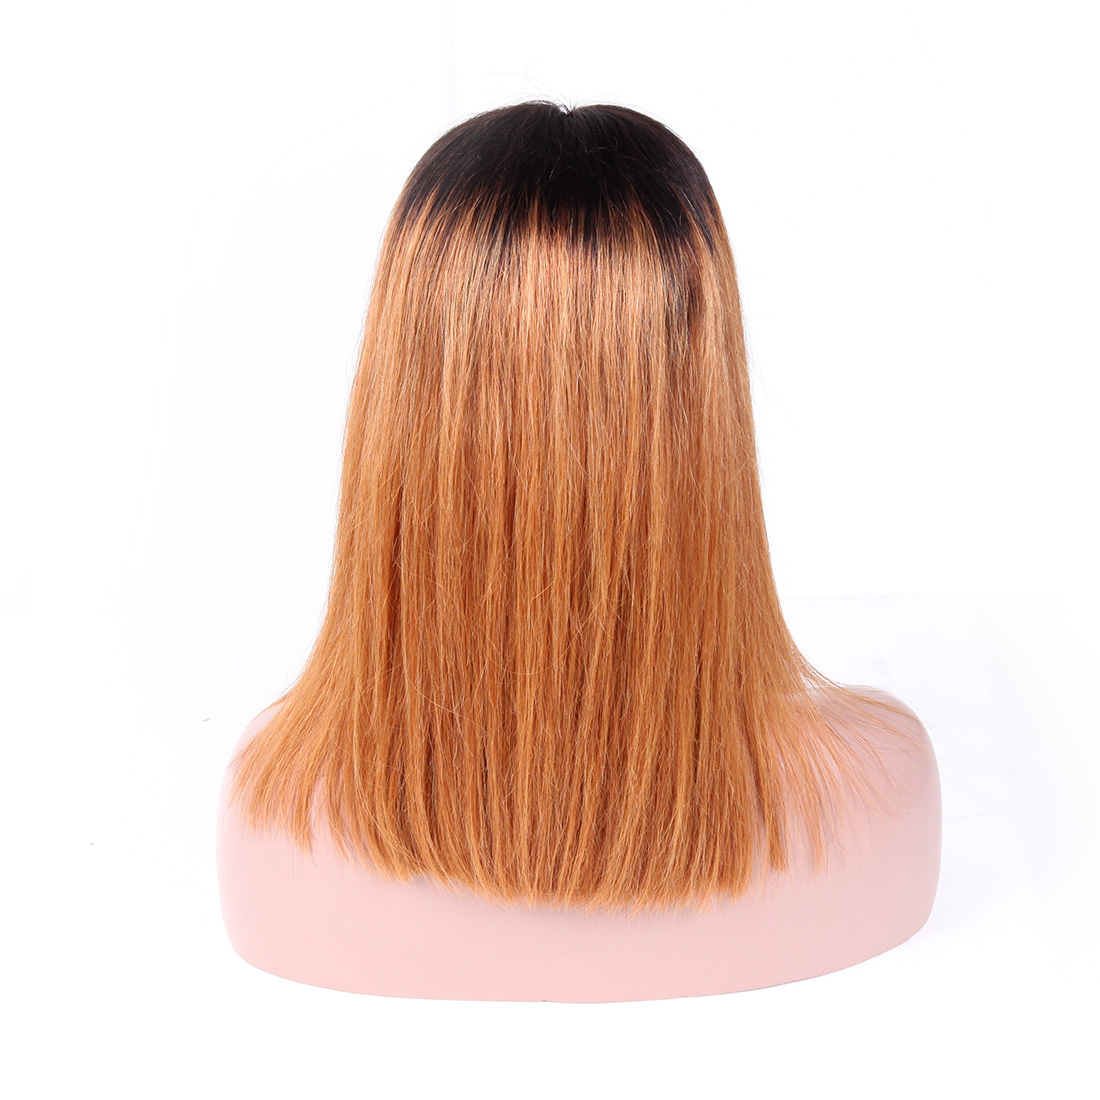 Wholesale Brazilian Human Hair Ombre Wig Human Hair 613 Lace Front Wig,Glueless Blonde Lace Wigs For Black Women